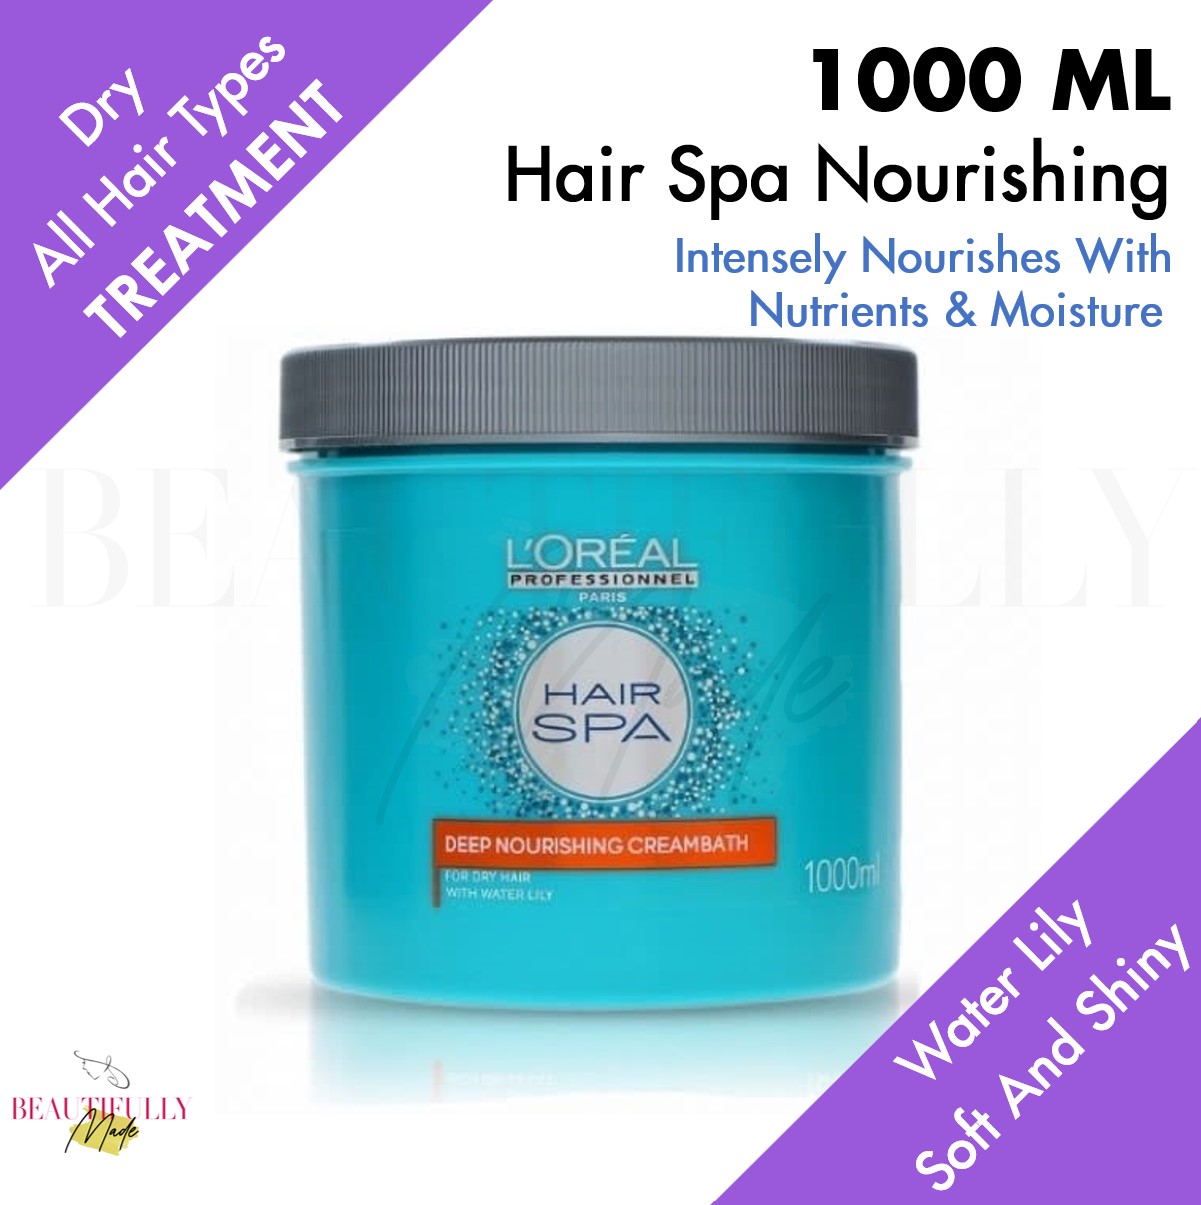 LOreal Professional Hair Spa Deep Nourishing Cream Bath 1000ml - Treatment  Mask for Dry Hair, Intensively Moisturise with Nutrients | Lazada Singapore